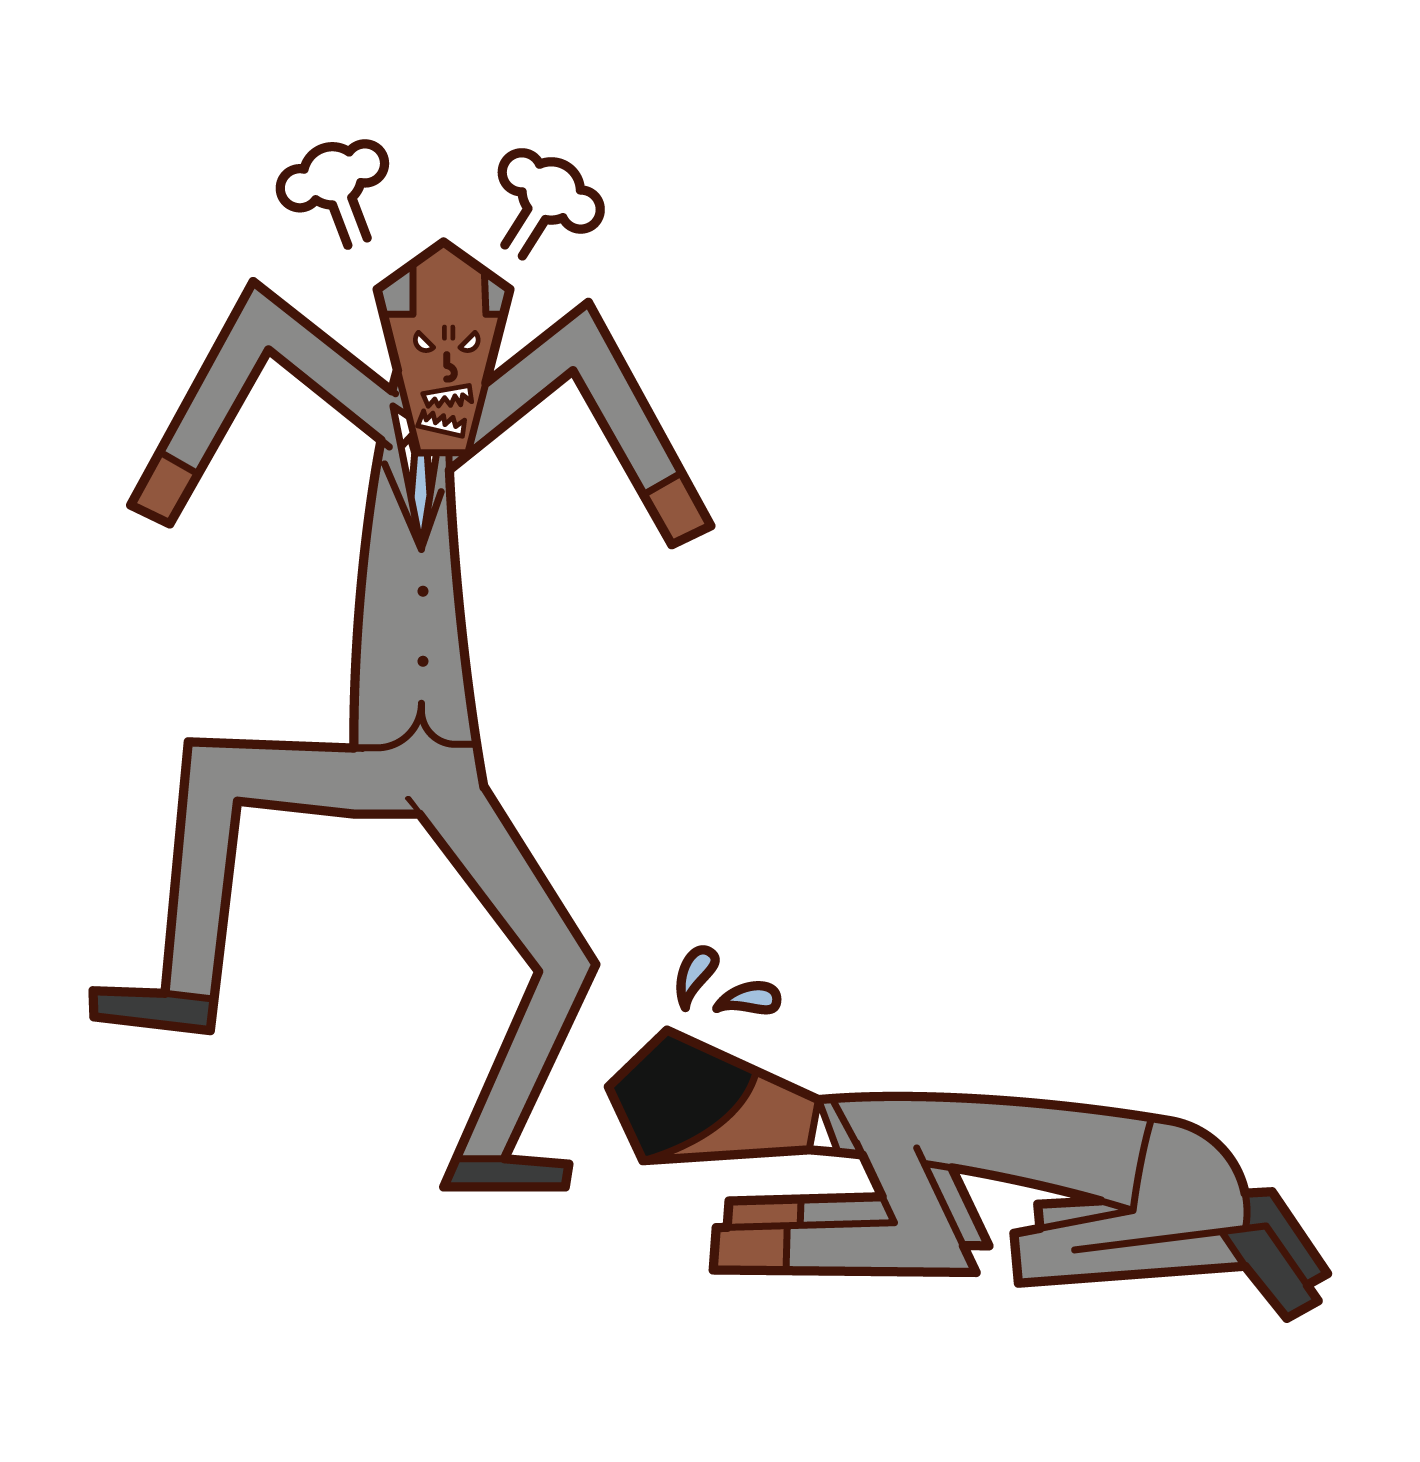 Illustration of a man sitting on the ground by his angry boss